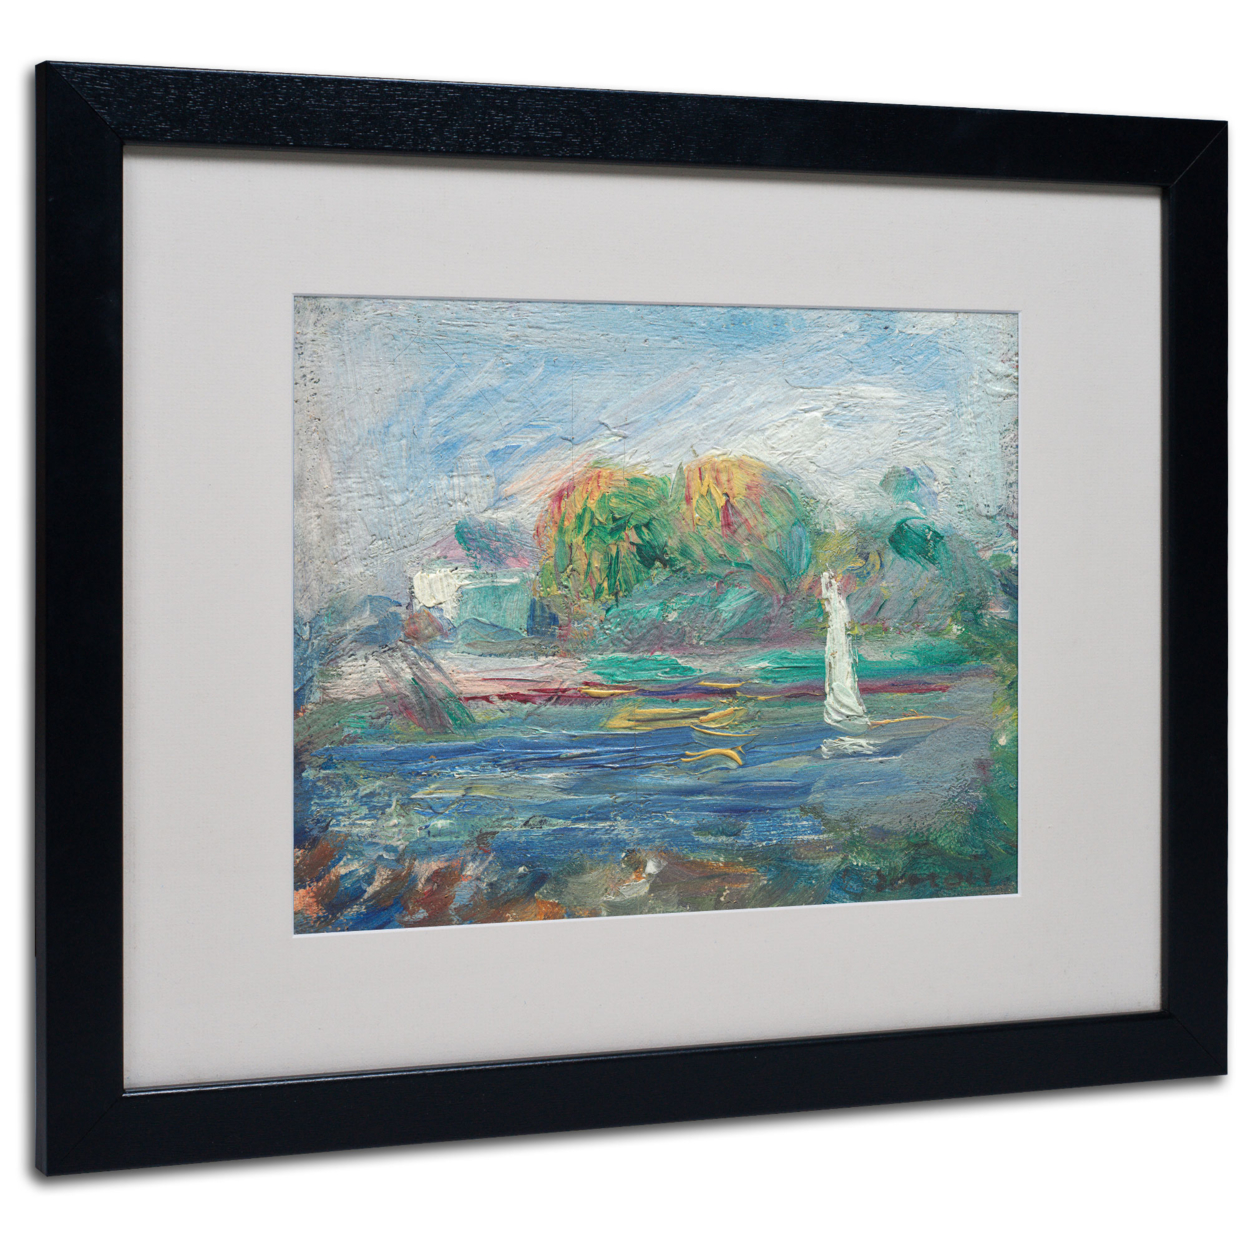 Pierre Renoir 'The Blue River 1890-1900' Black Wooden Framed Art 18 X 22 Inches